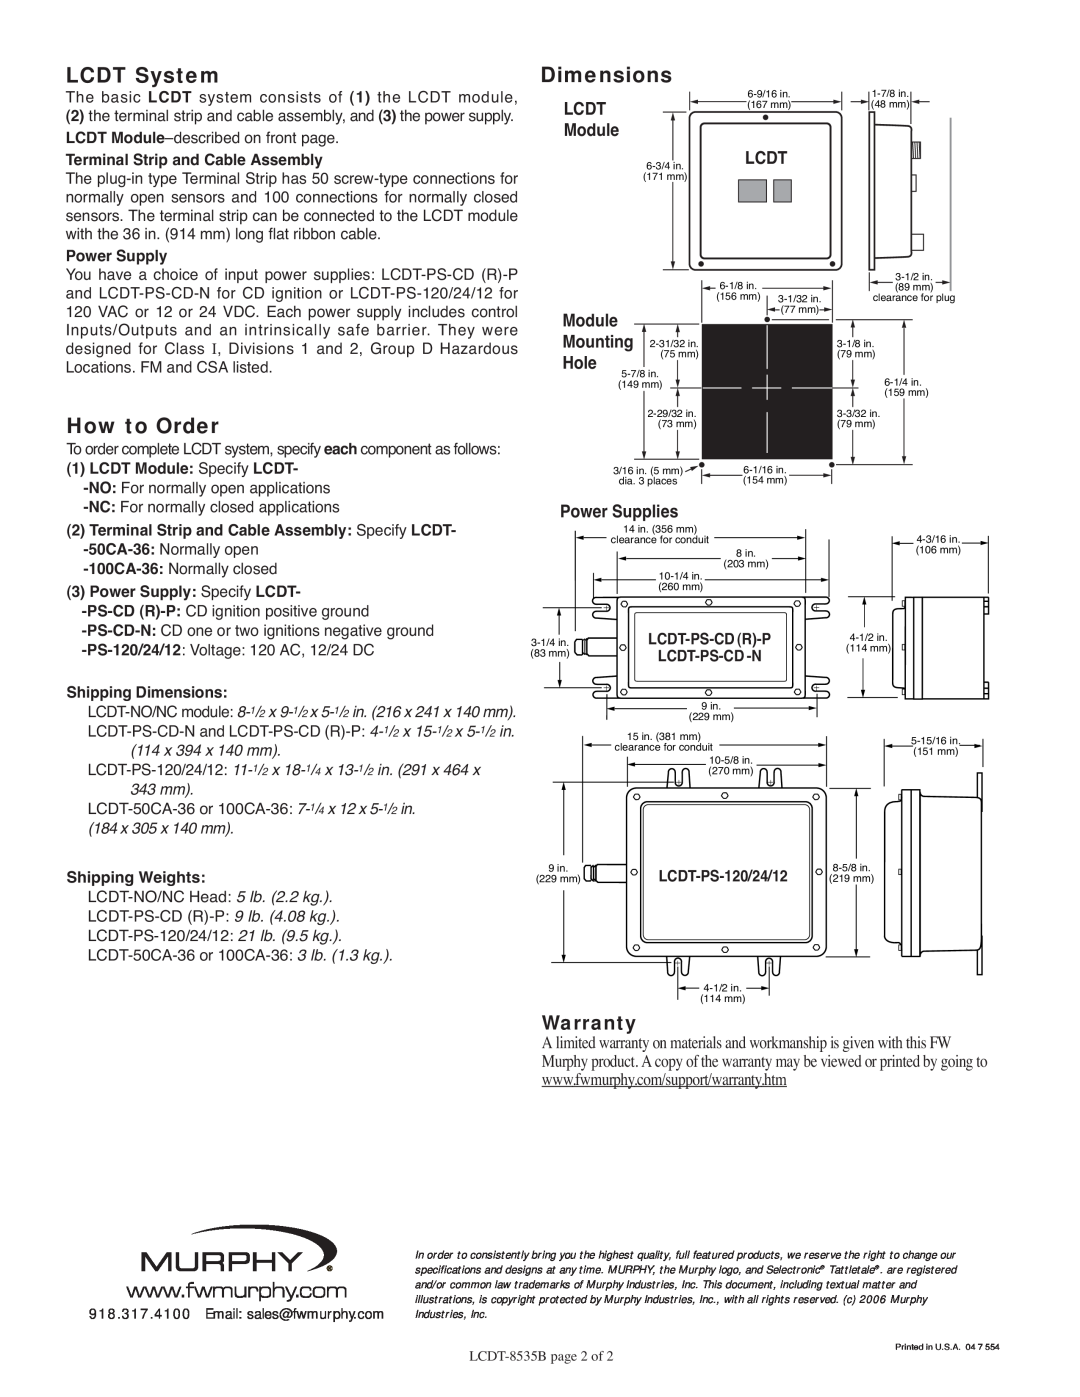 Murphy LCDT-8535B LCDT System, Dimensions, How to Order, LCDT-NO/NC module 8-1/2 x 9-1/2 x 5-1/2 in. 216 x 241 x 140 mm 